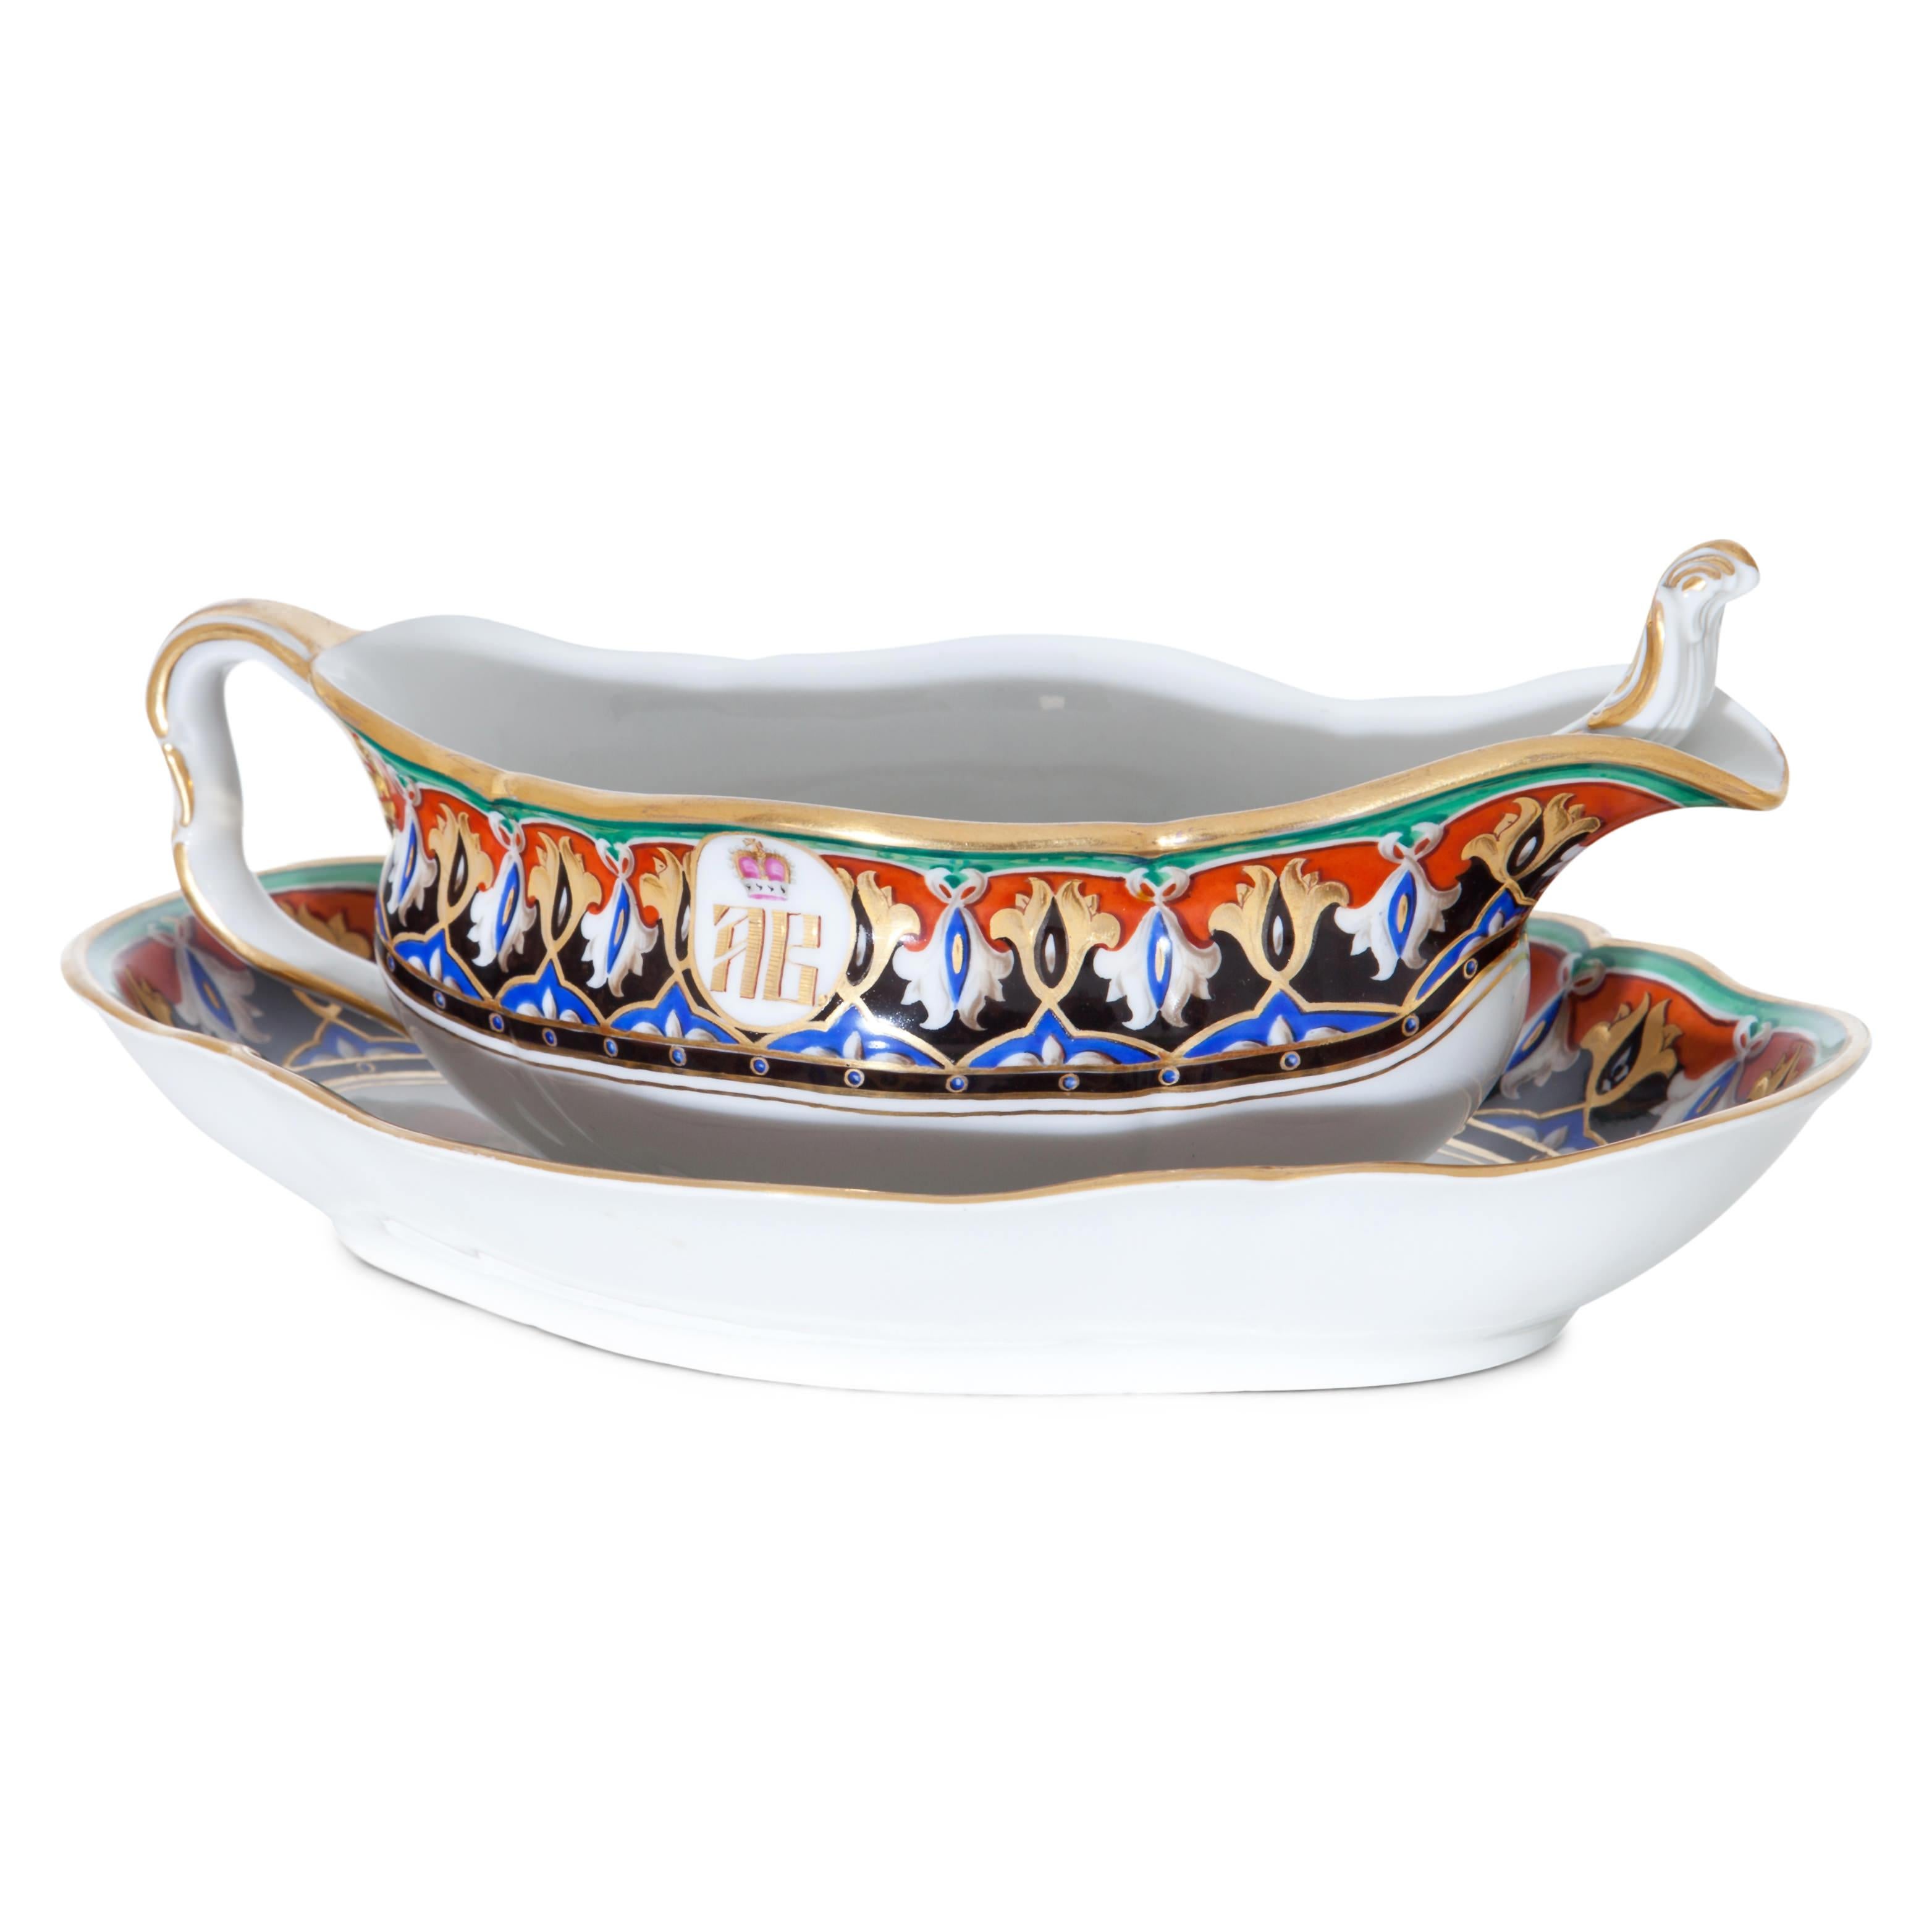 Porcelain gravy boat with a spoon by KPM (1849-1870) with old Slavic monogram WA, possibly for a prince Wolkonsky. Marked on the bottom.
Dimensions gravy boat: 9 x 26.5 x 19 cm
Dimensions spoon: 3.5 x 19.5 x 5 cm.